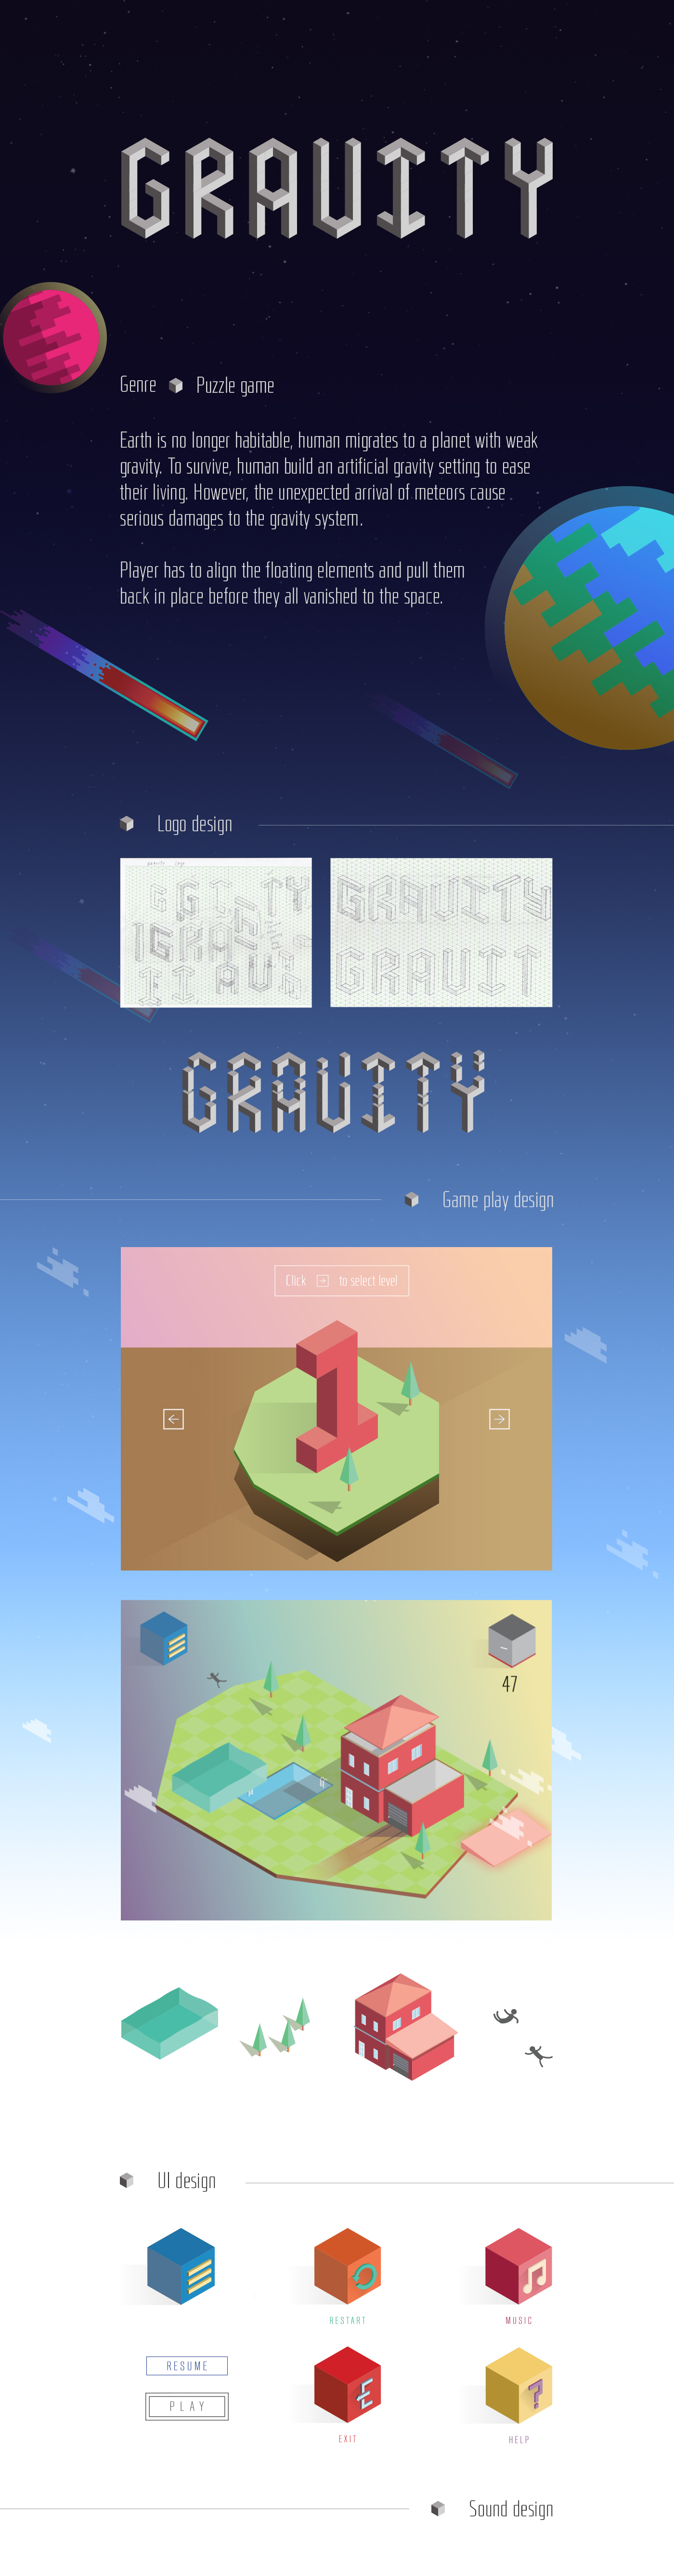 game Isometric puzzle Flash Space  gravity planet flashgame sound OST sounddesign soundtrack